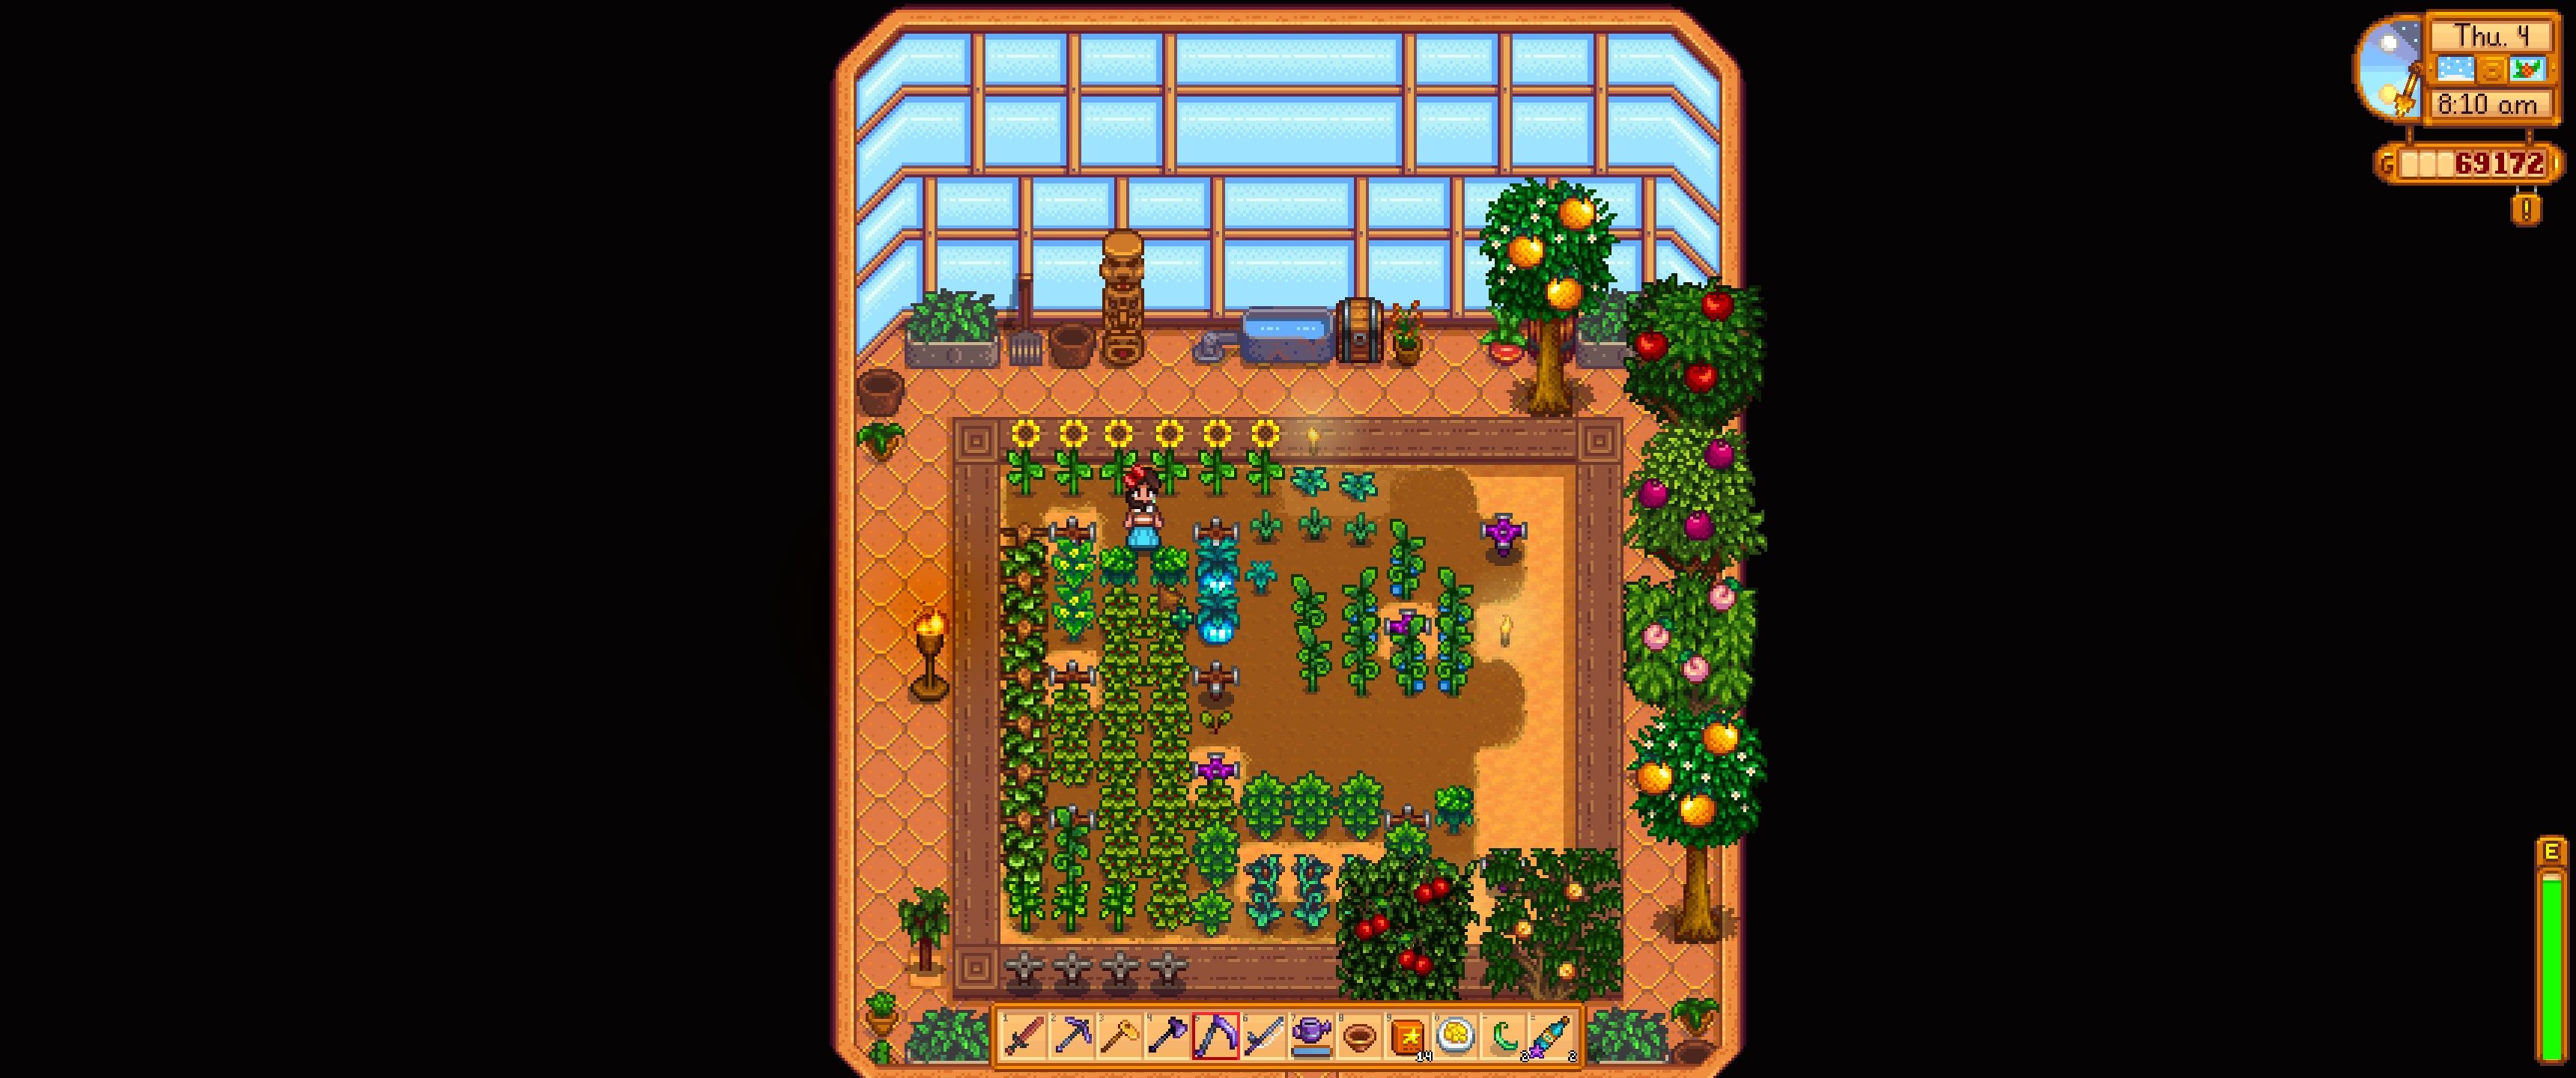 Stardew Valley: The player stands by their Broccoli plants in the greenhouse.